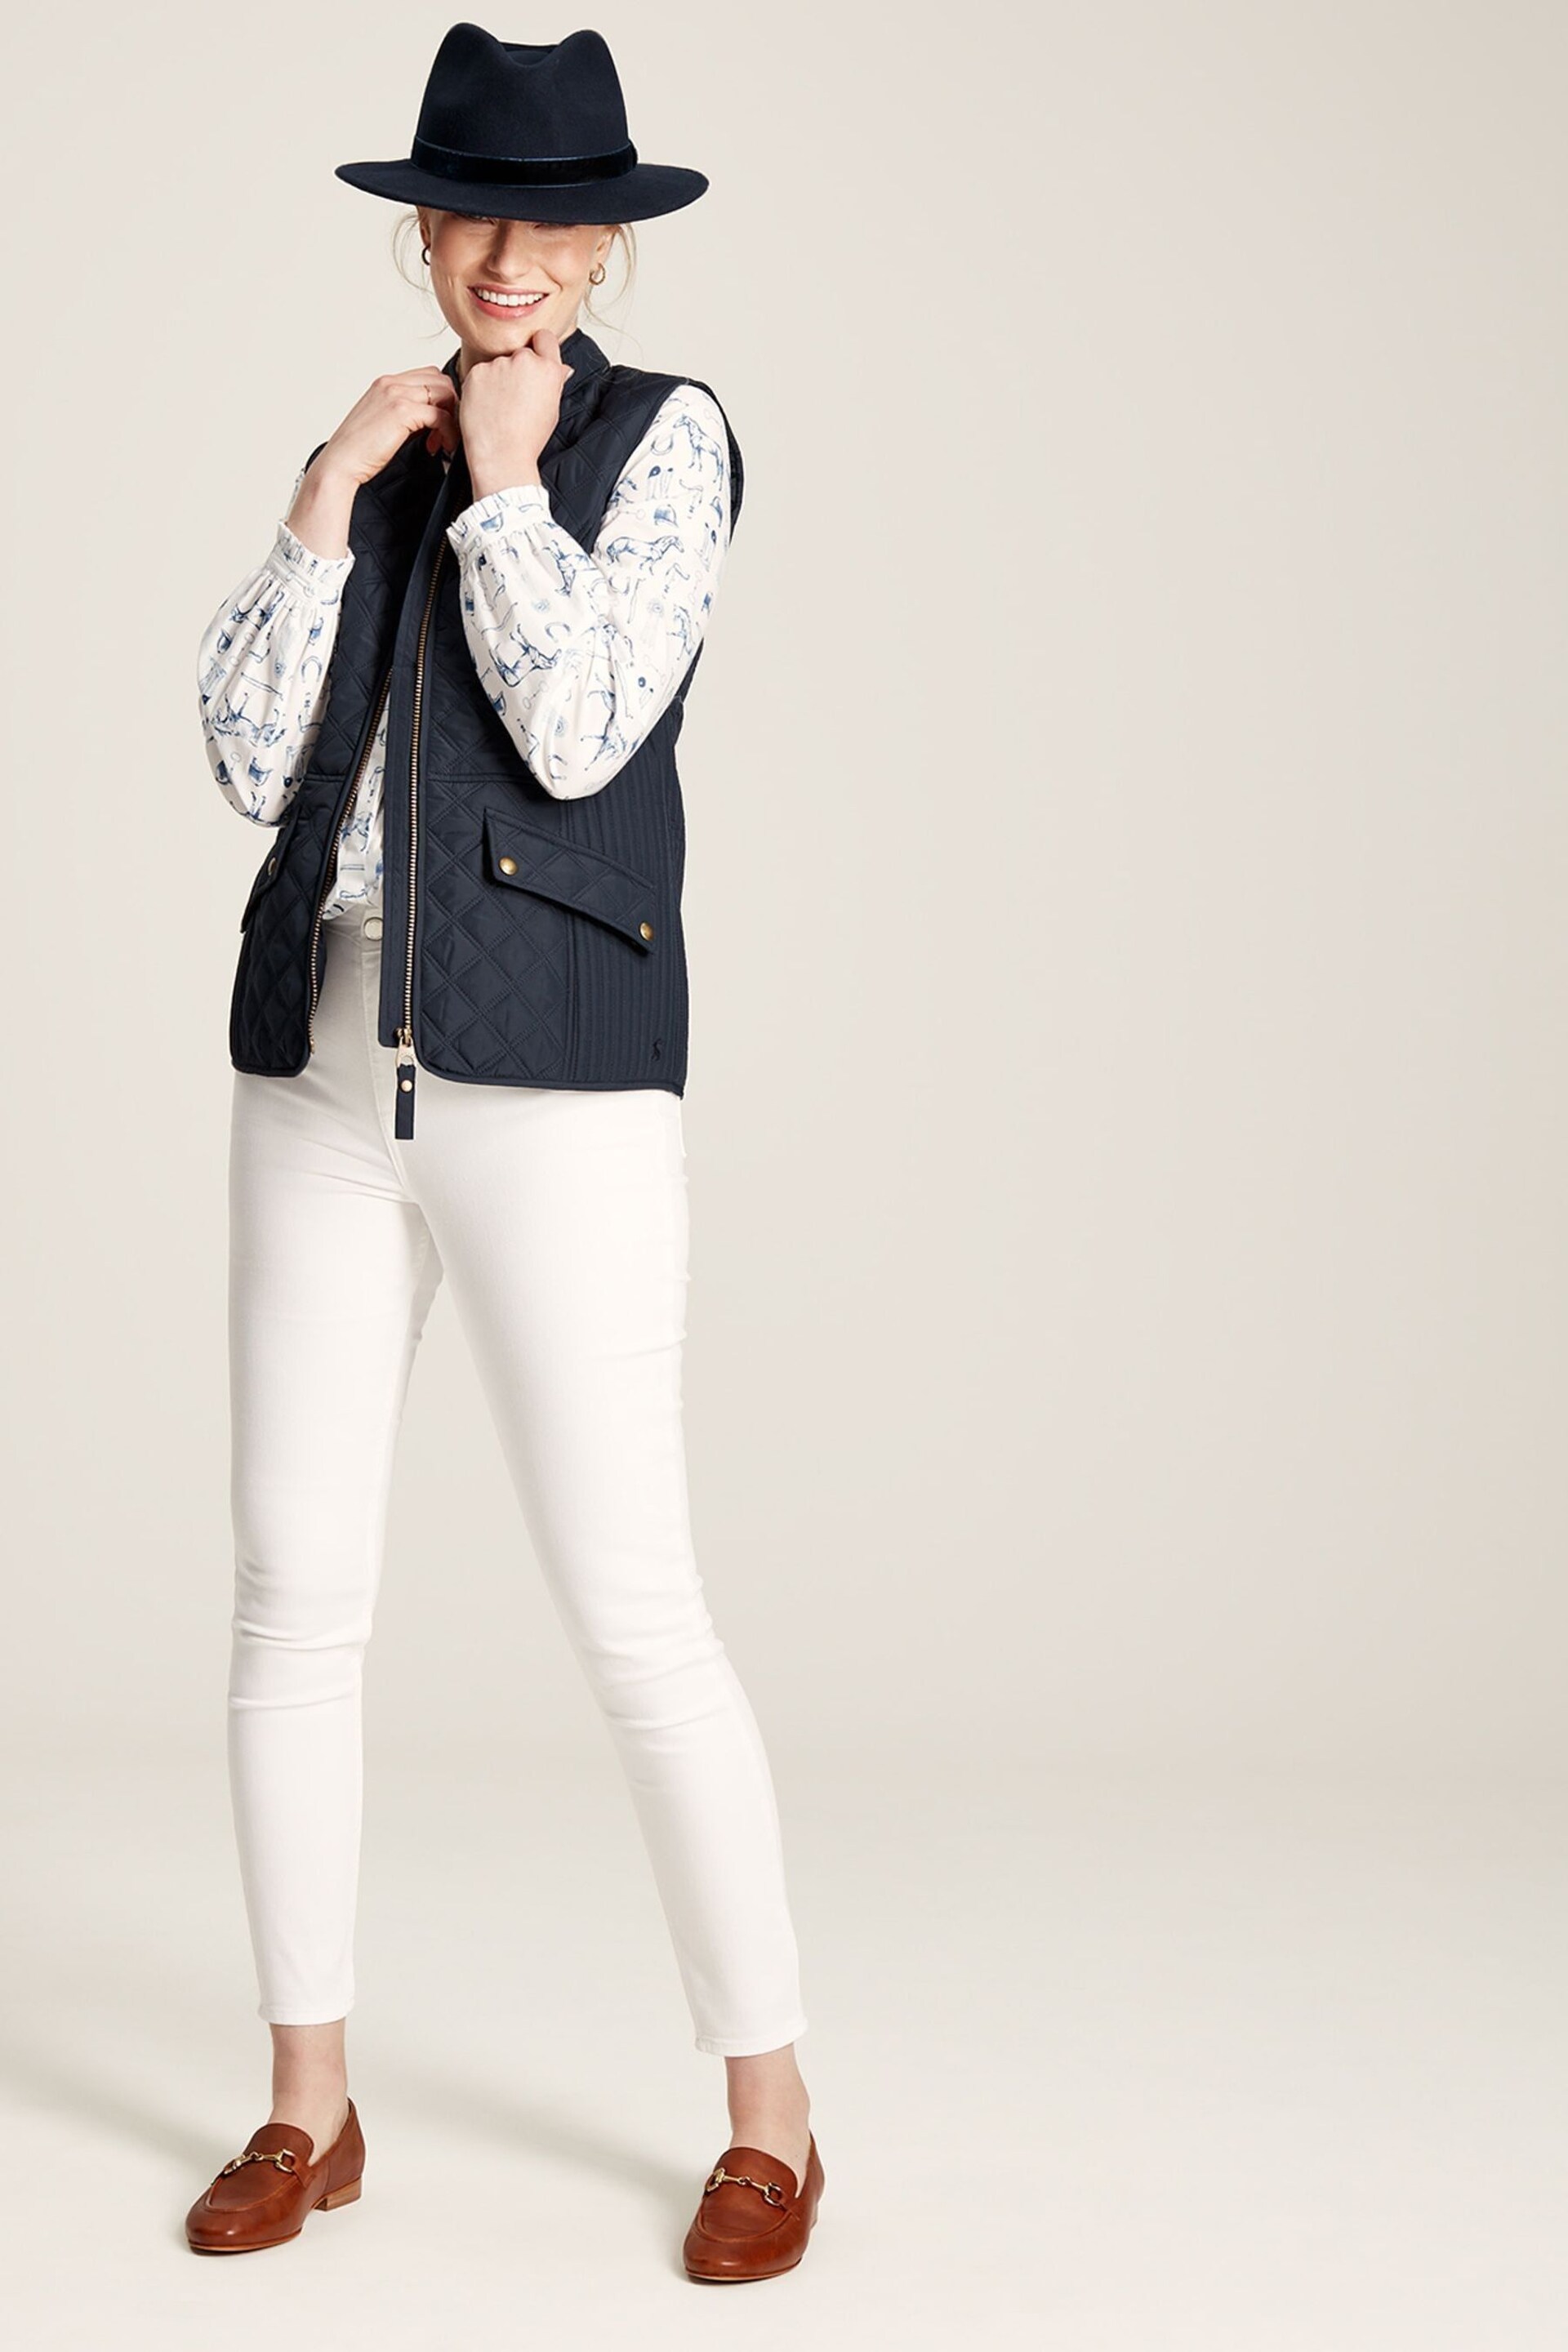 Joules White Denim Stretch Skinny Jeans - Image 5 of 6